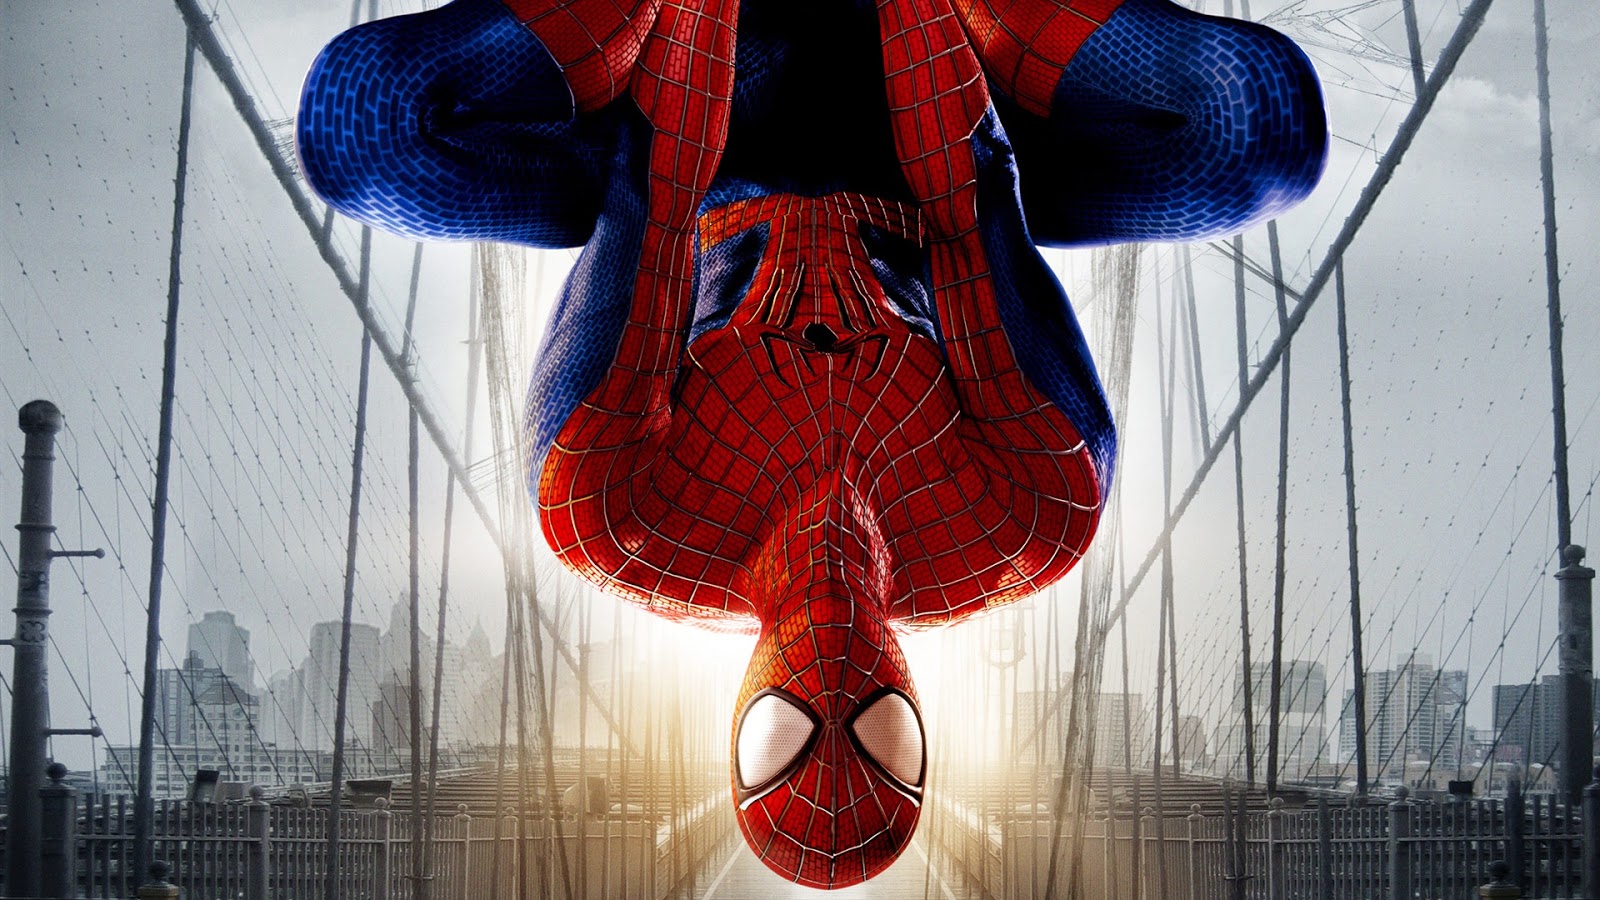 Free download Amazing Spiderman 2 HD Wallpapers [1920x1080] Walls720 [ 1600x900] for your Desktop, Mobile & Tablet | Explore 45+ Spiderman  Wallpaper 1920x1080 | Spiderman Wallpaper, Spiderman Wallpapers, Spiderman  Cartoon Wallpapers